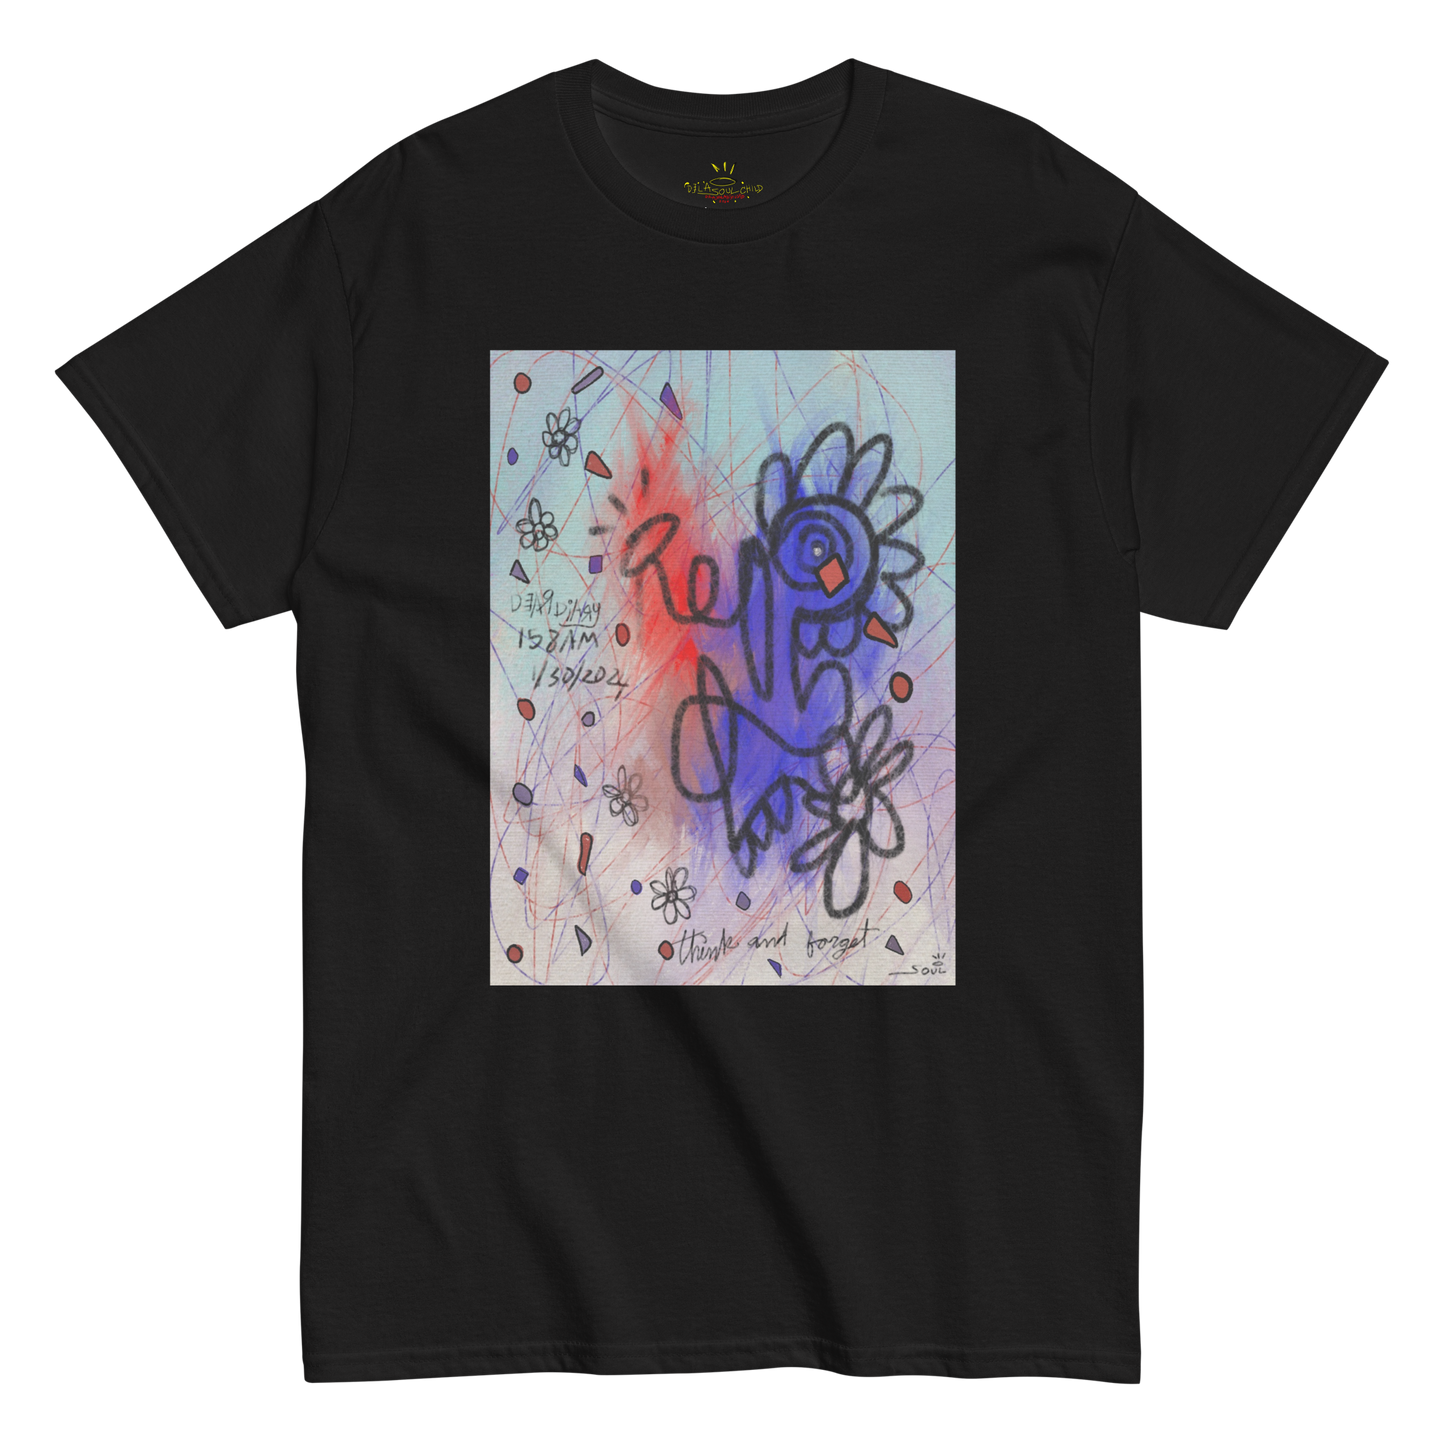 Dear Diary #36, 2024 1:58 AM - Collectible T-Shirt - Based off the original 1/1 Solana NFT Print